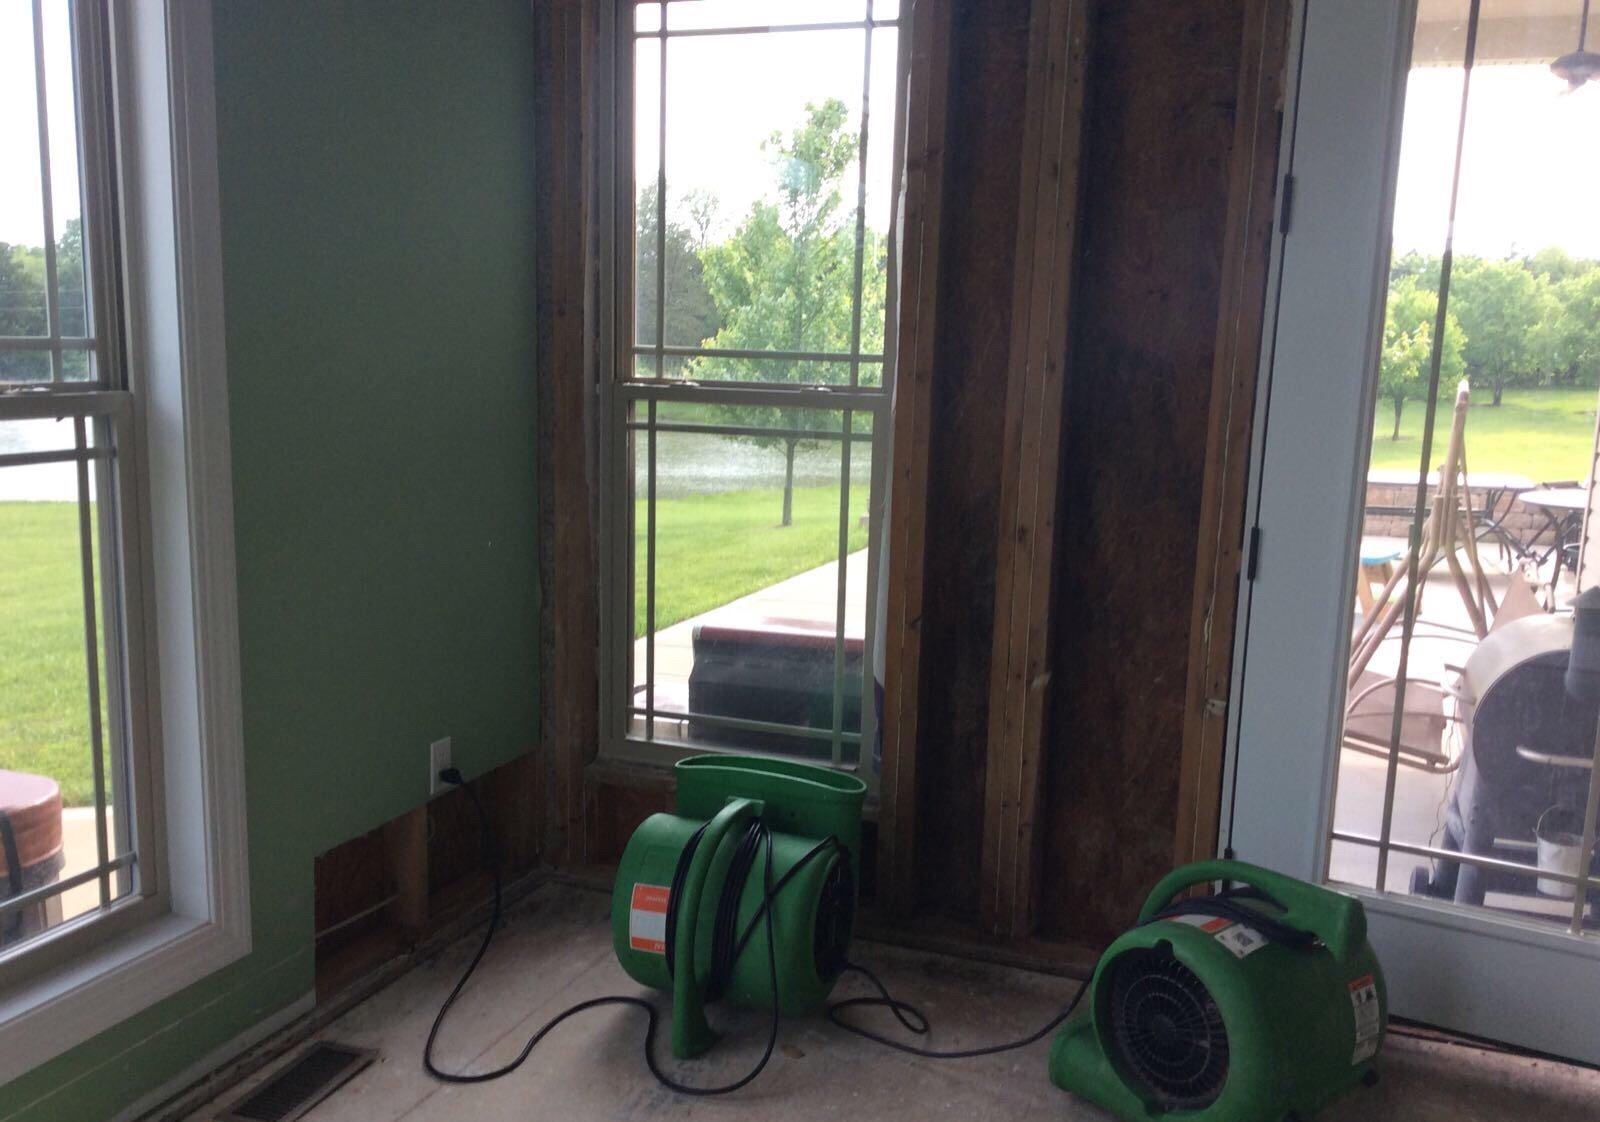 SERVPRO of St. Charles City was on the scene of this water damage quickly.